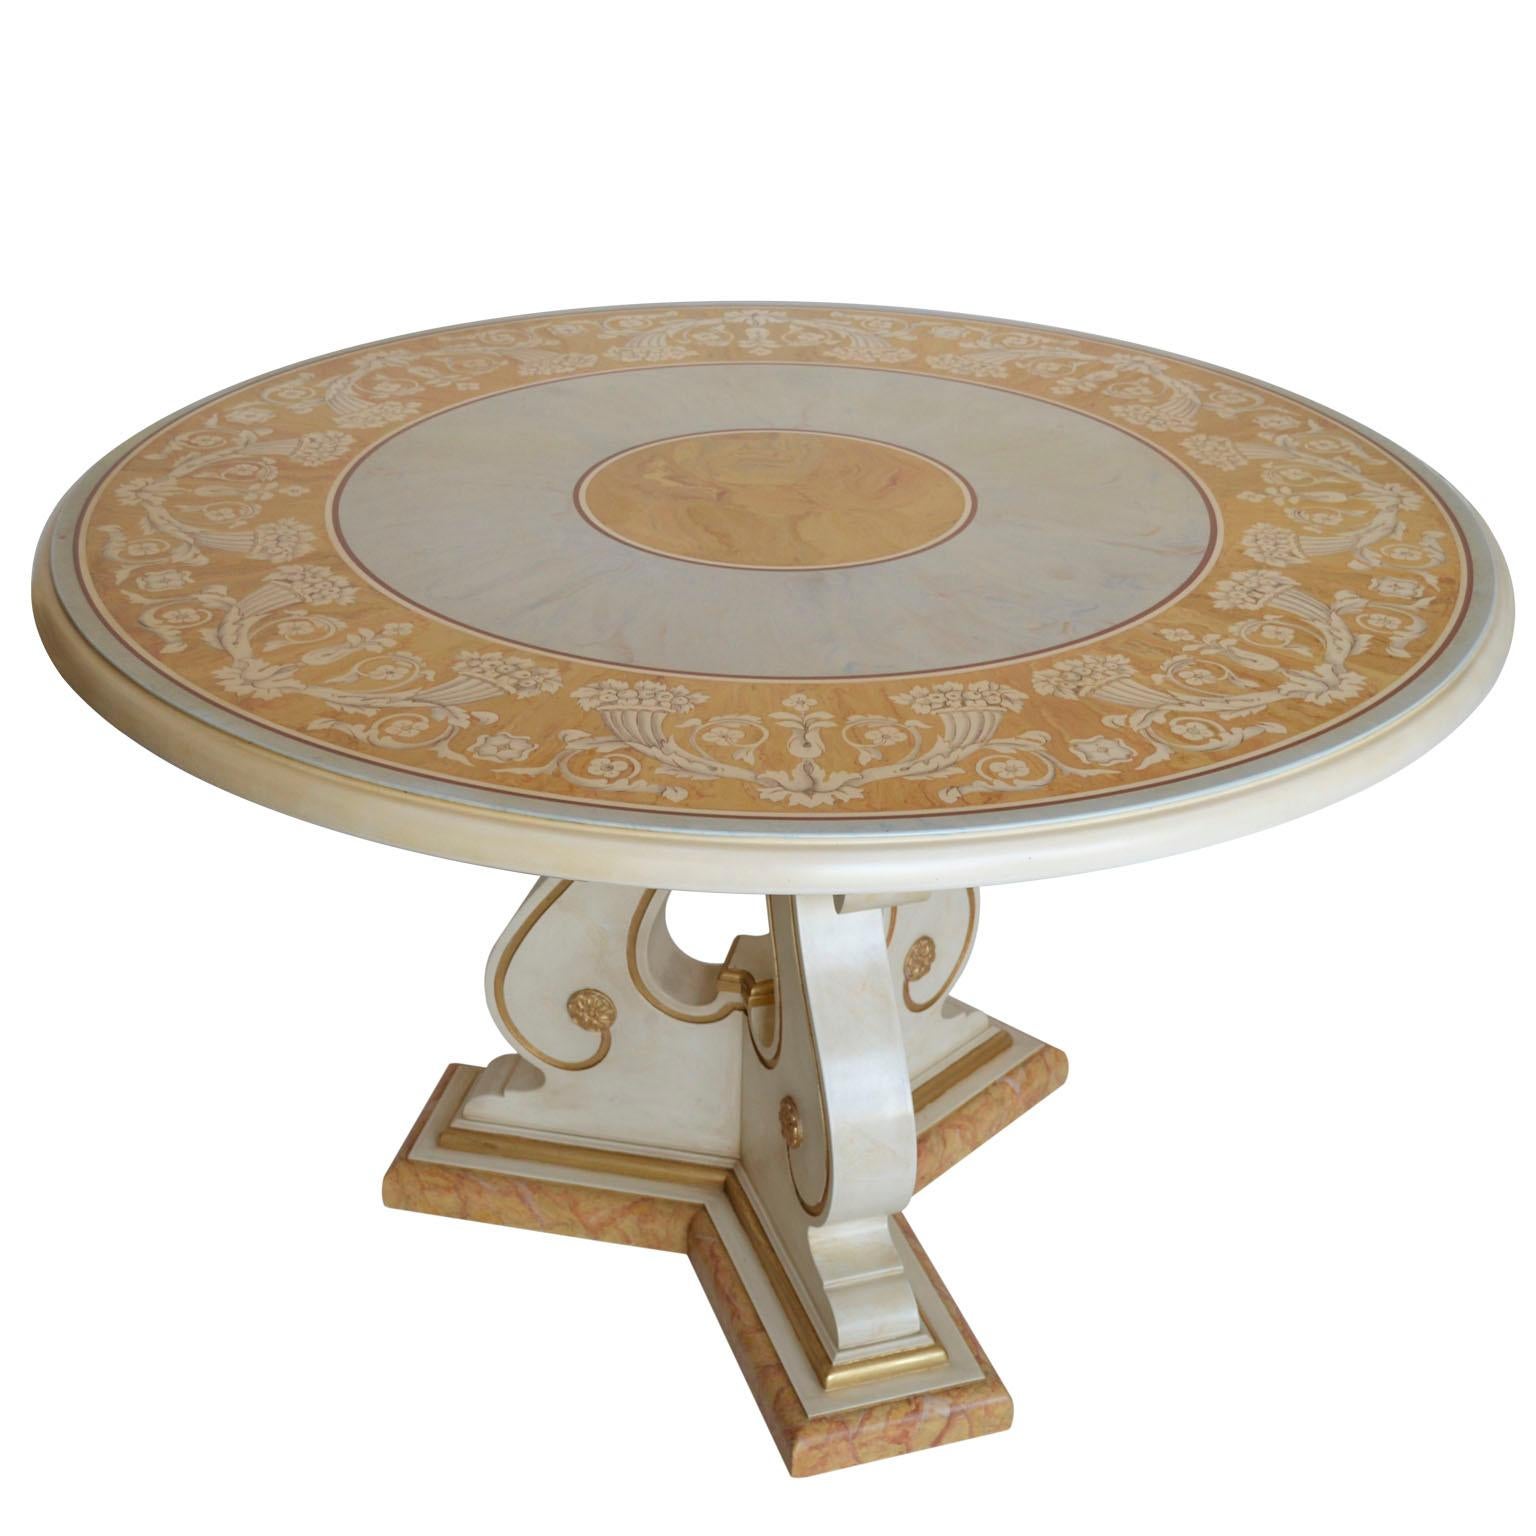 Dining table round scagliola art top wooden base gold details handmade in Italy 